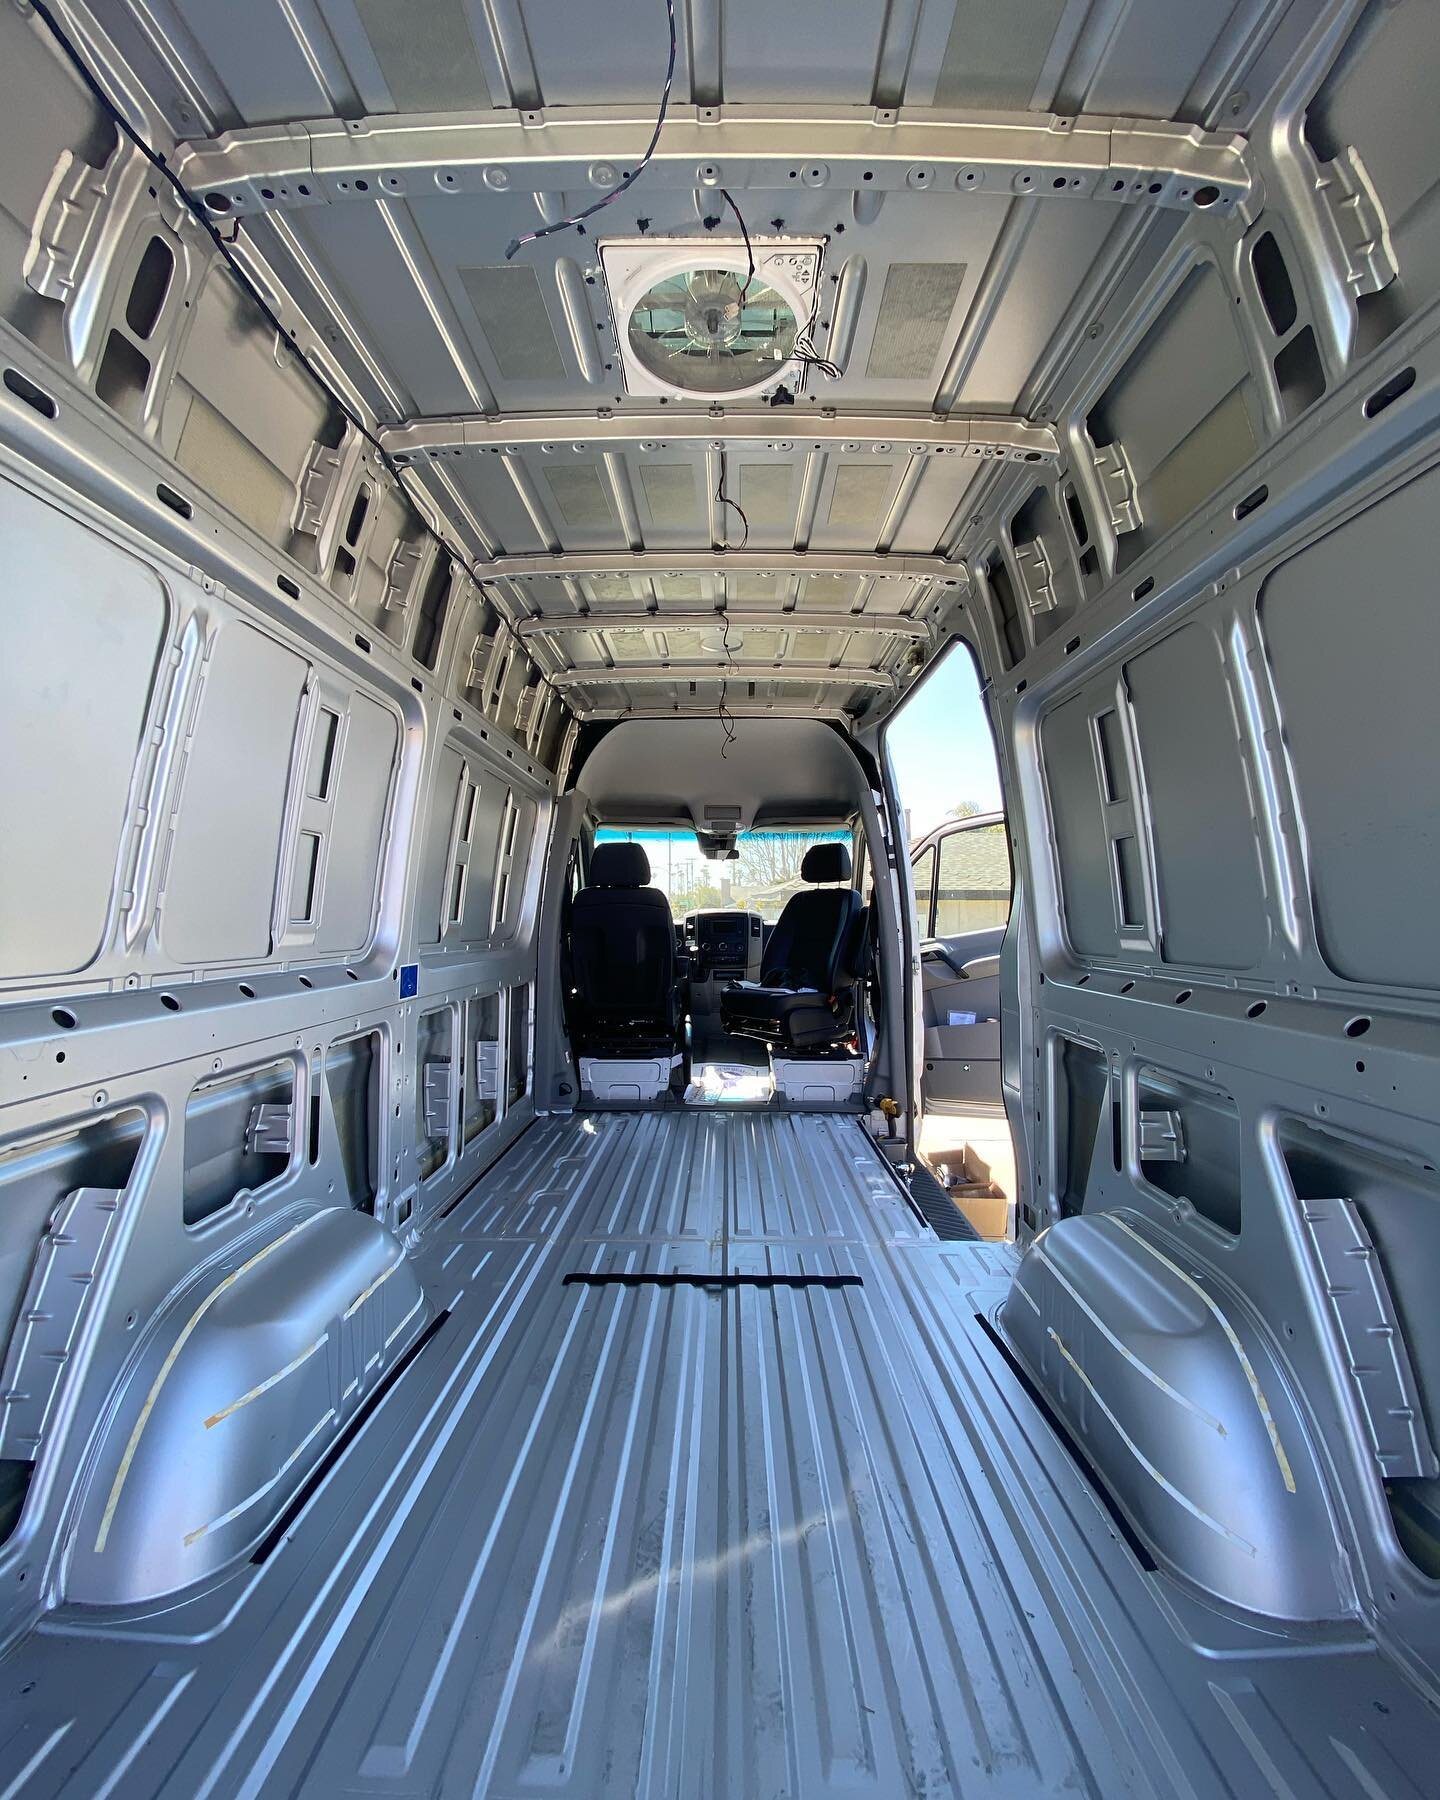 In the market for a custom van? Now&rsquo;s your chance to have your say in the build. This 2018 Sprinter 144&rdquo; is ready to be built. DM if you&rsquo;re interested.  #sprintervan #sprinterconversion #mercedes #vanlife #vanconversion